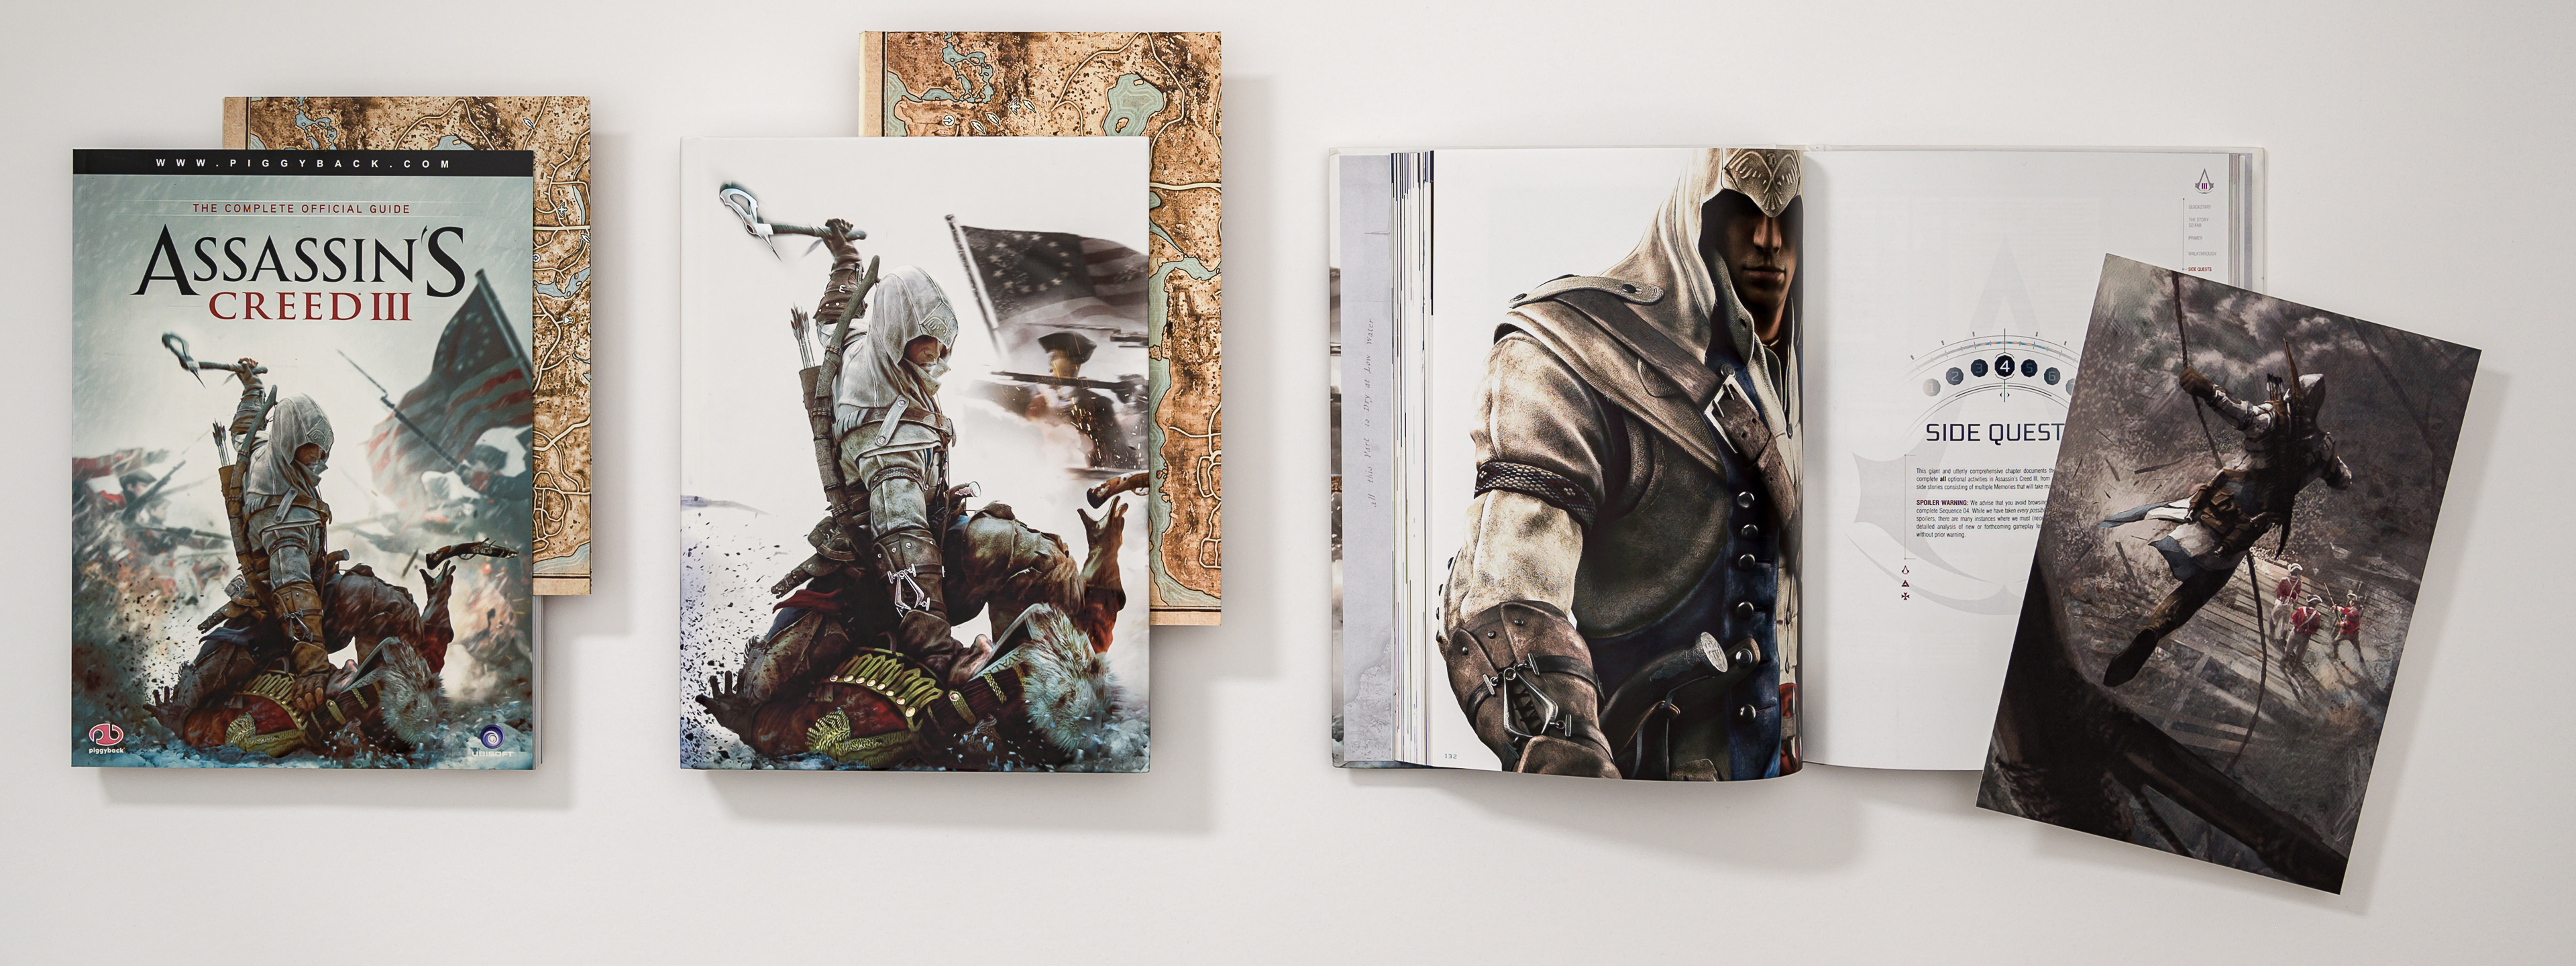 Assassin's Creed III - The Complete Official Guide - Collector's Edition -  Piggyback: 9780307895462 - AbeBooks